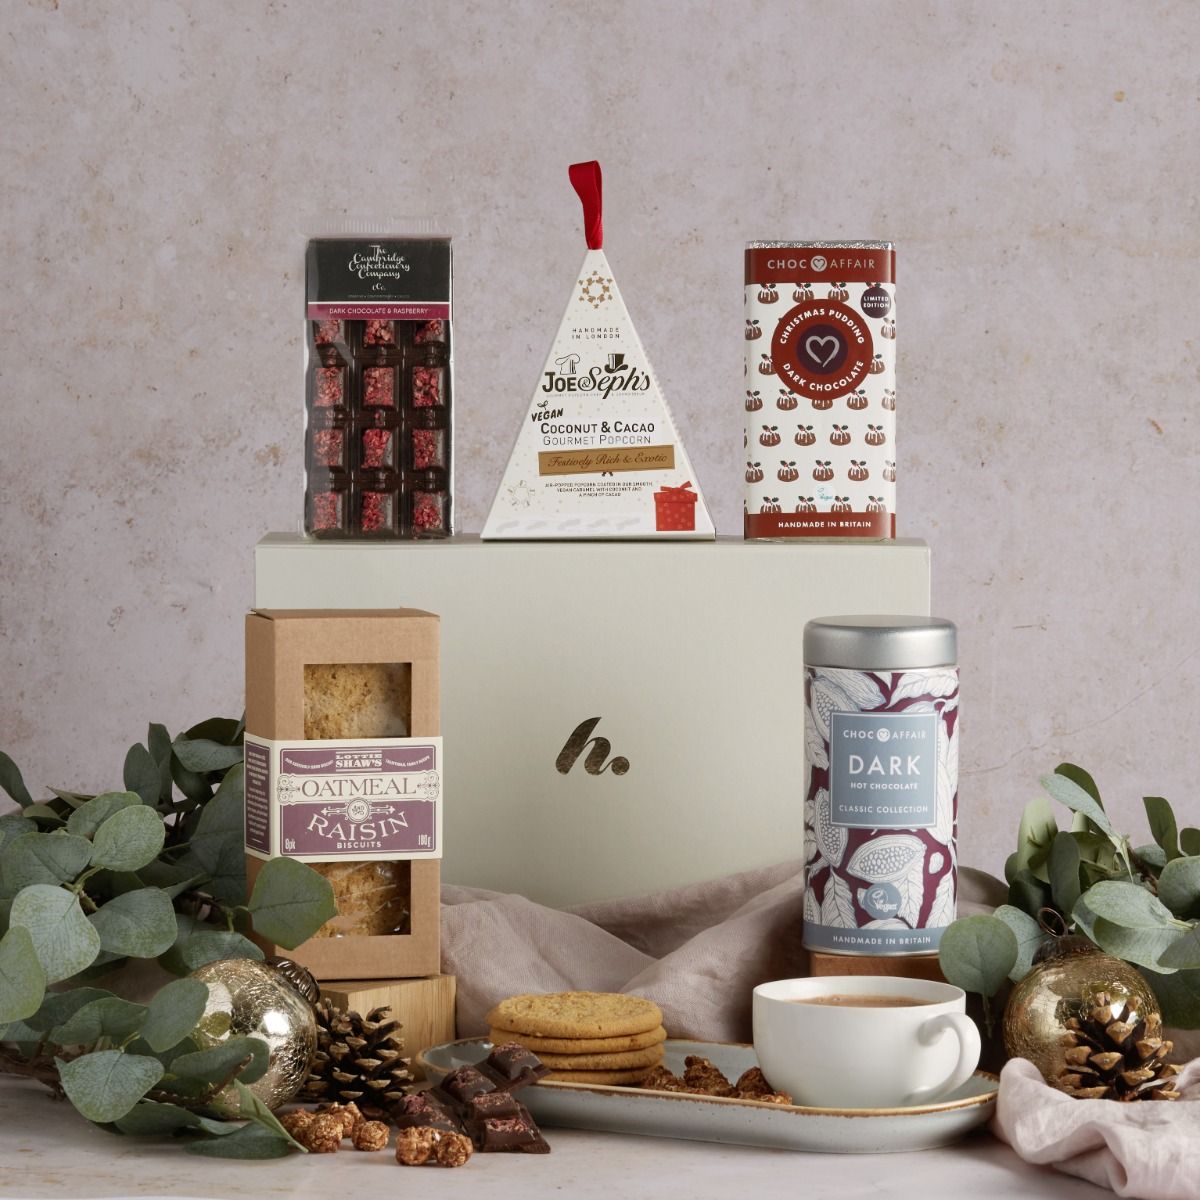 Vegan Hot Chocolate Christmas Hamper on display with its contents and basket